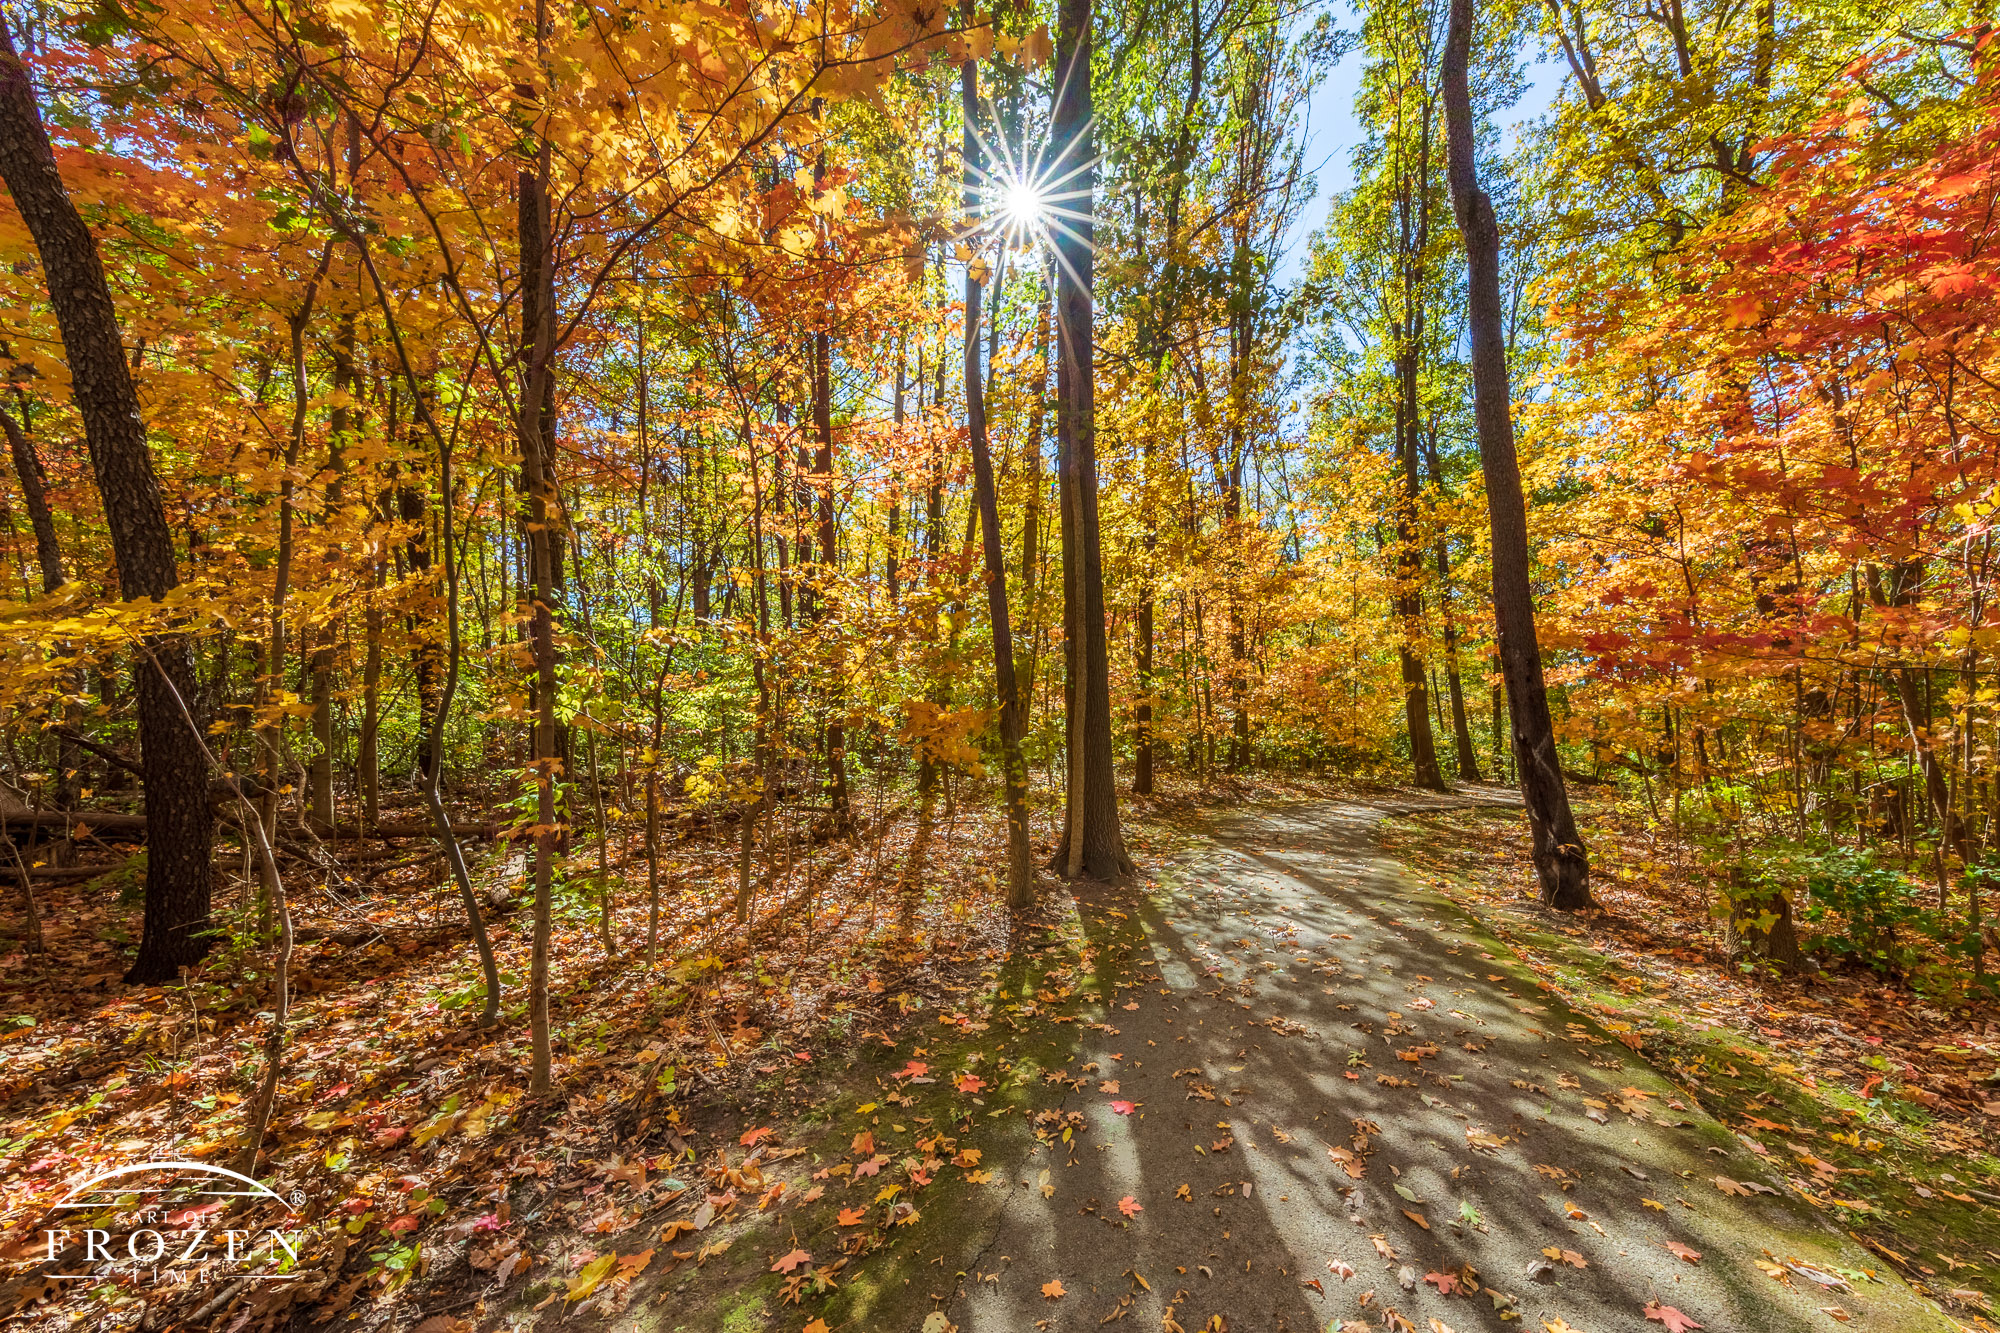 A curving pathway under brightly colored leaves which were colorfully backlight by the October sun